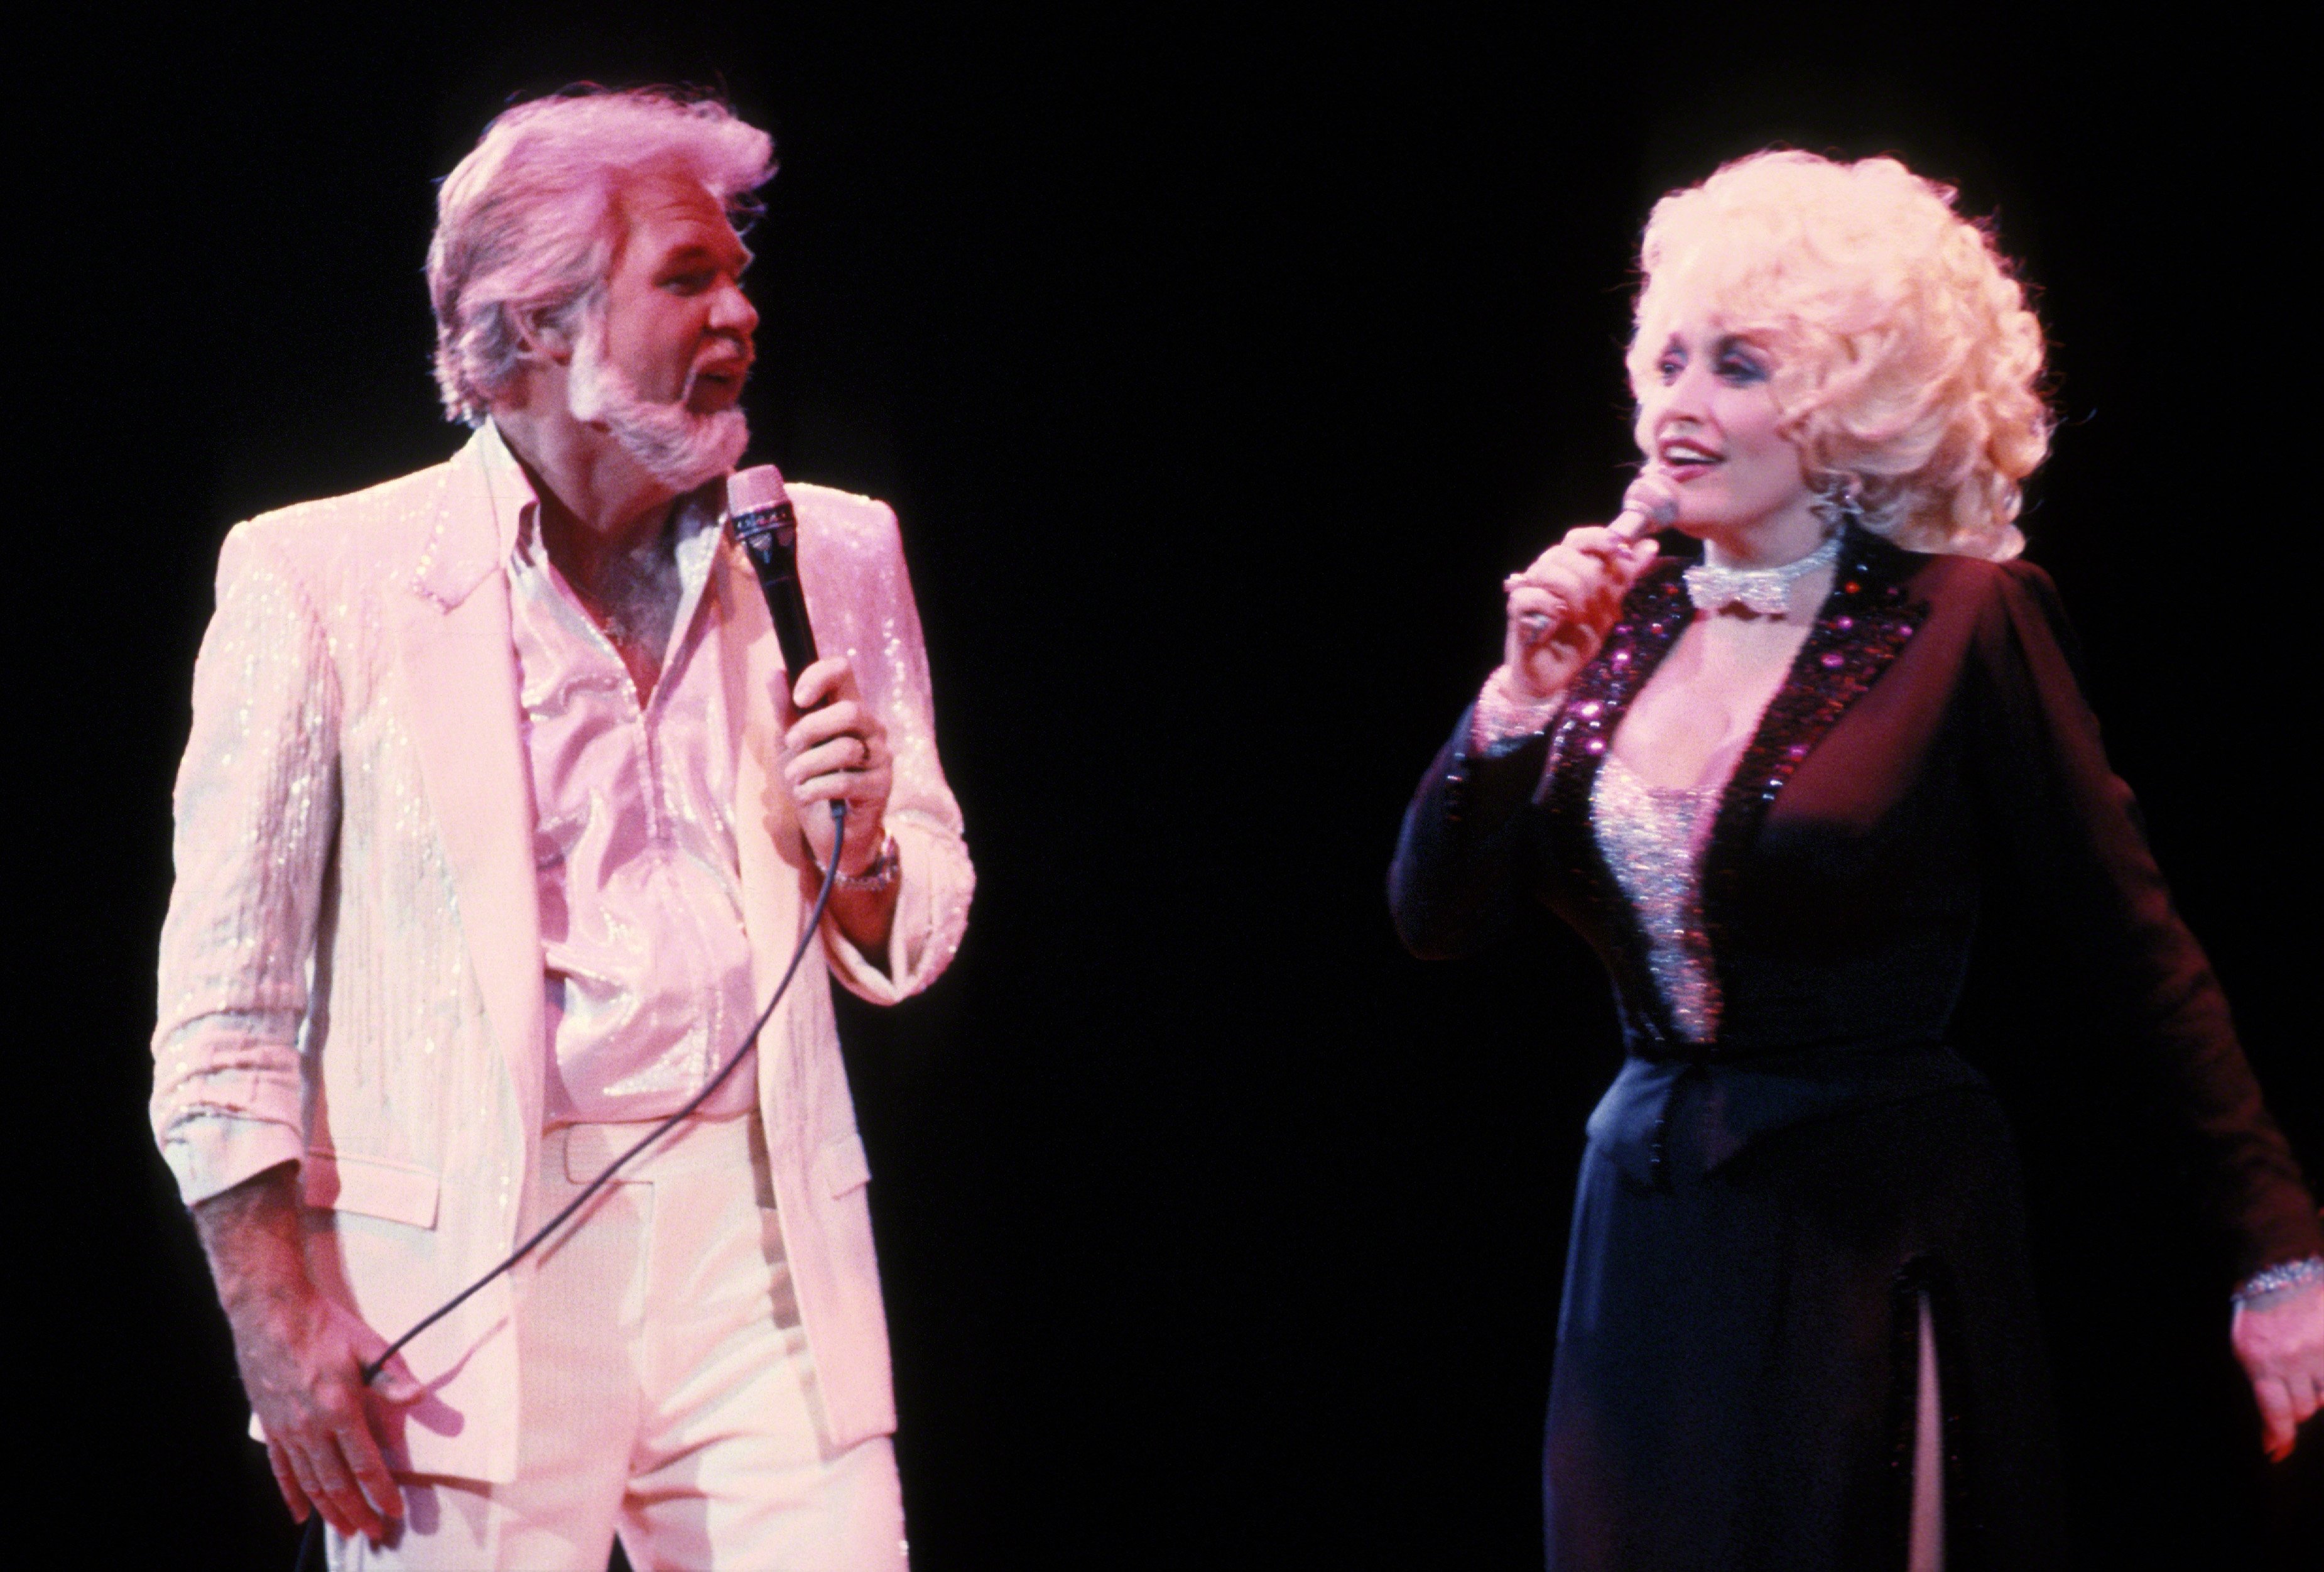 Kenny Rogers and Dolly Parton sing on stage.